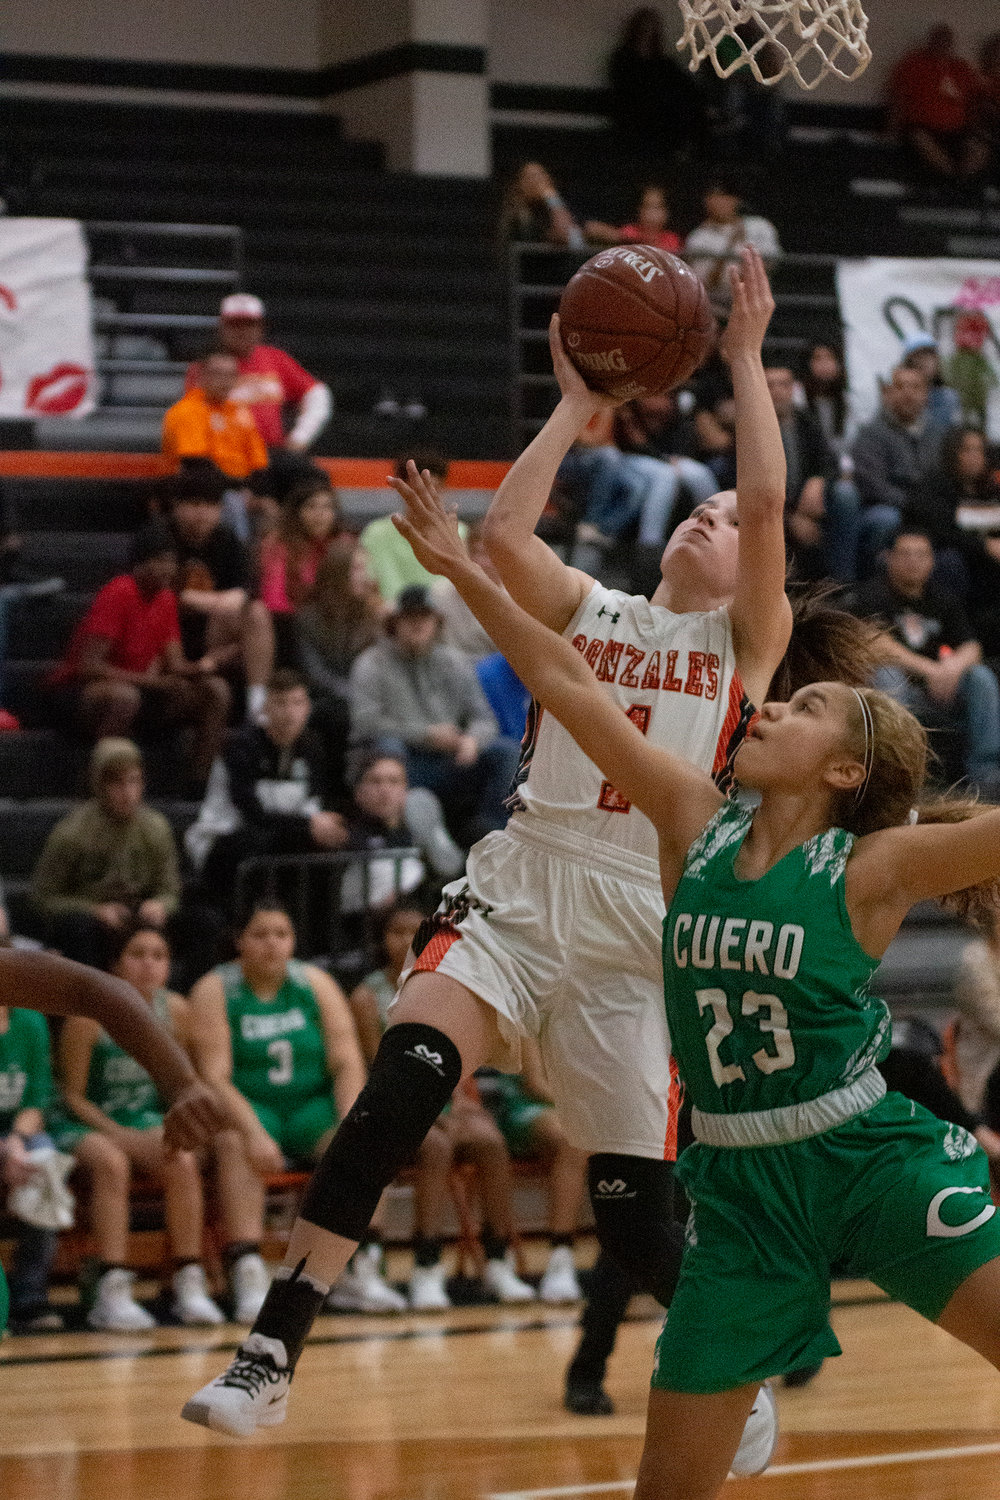 Sam Barnick (1) goes up for a layup in Gonzales' 38-30 win over Cuero.